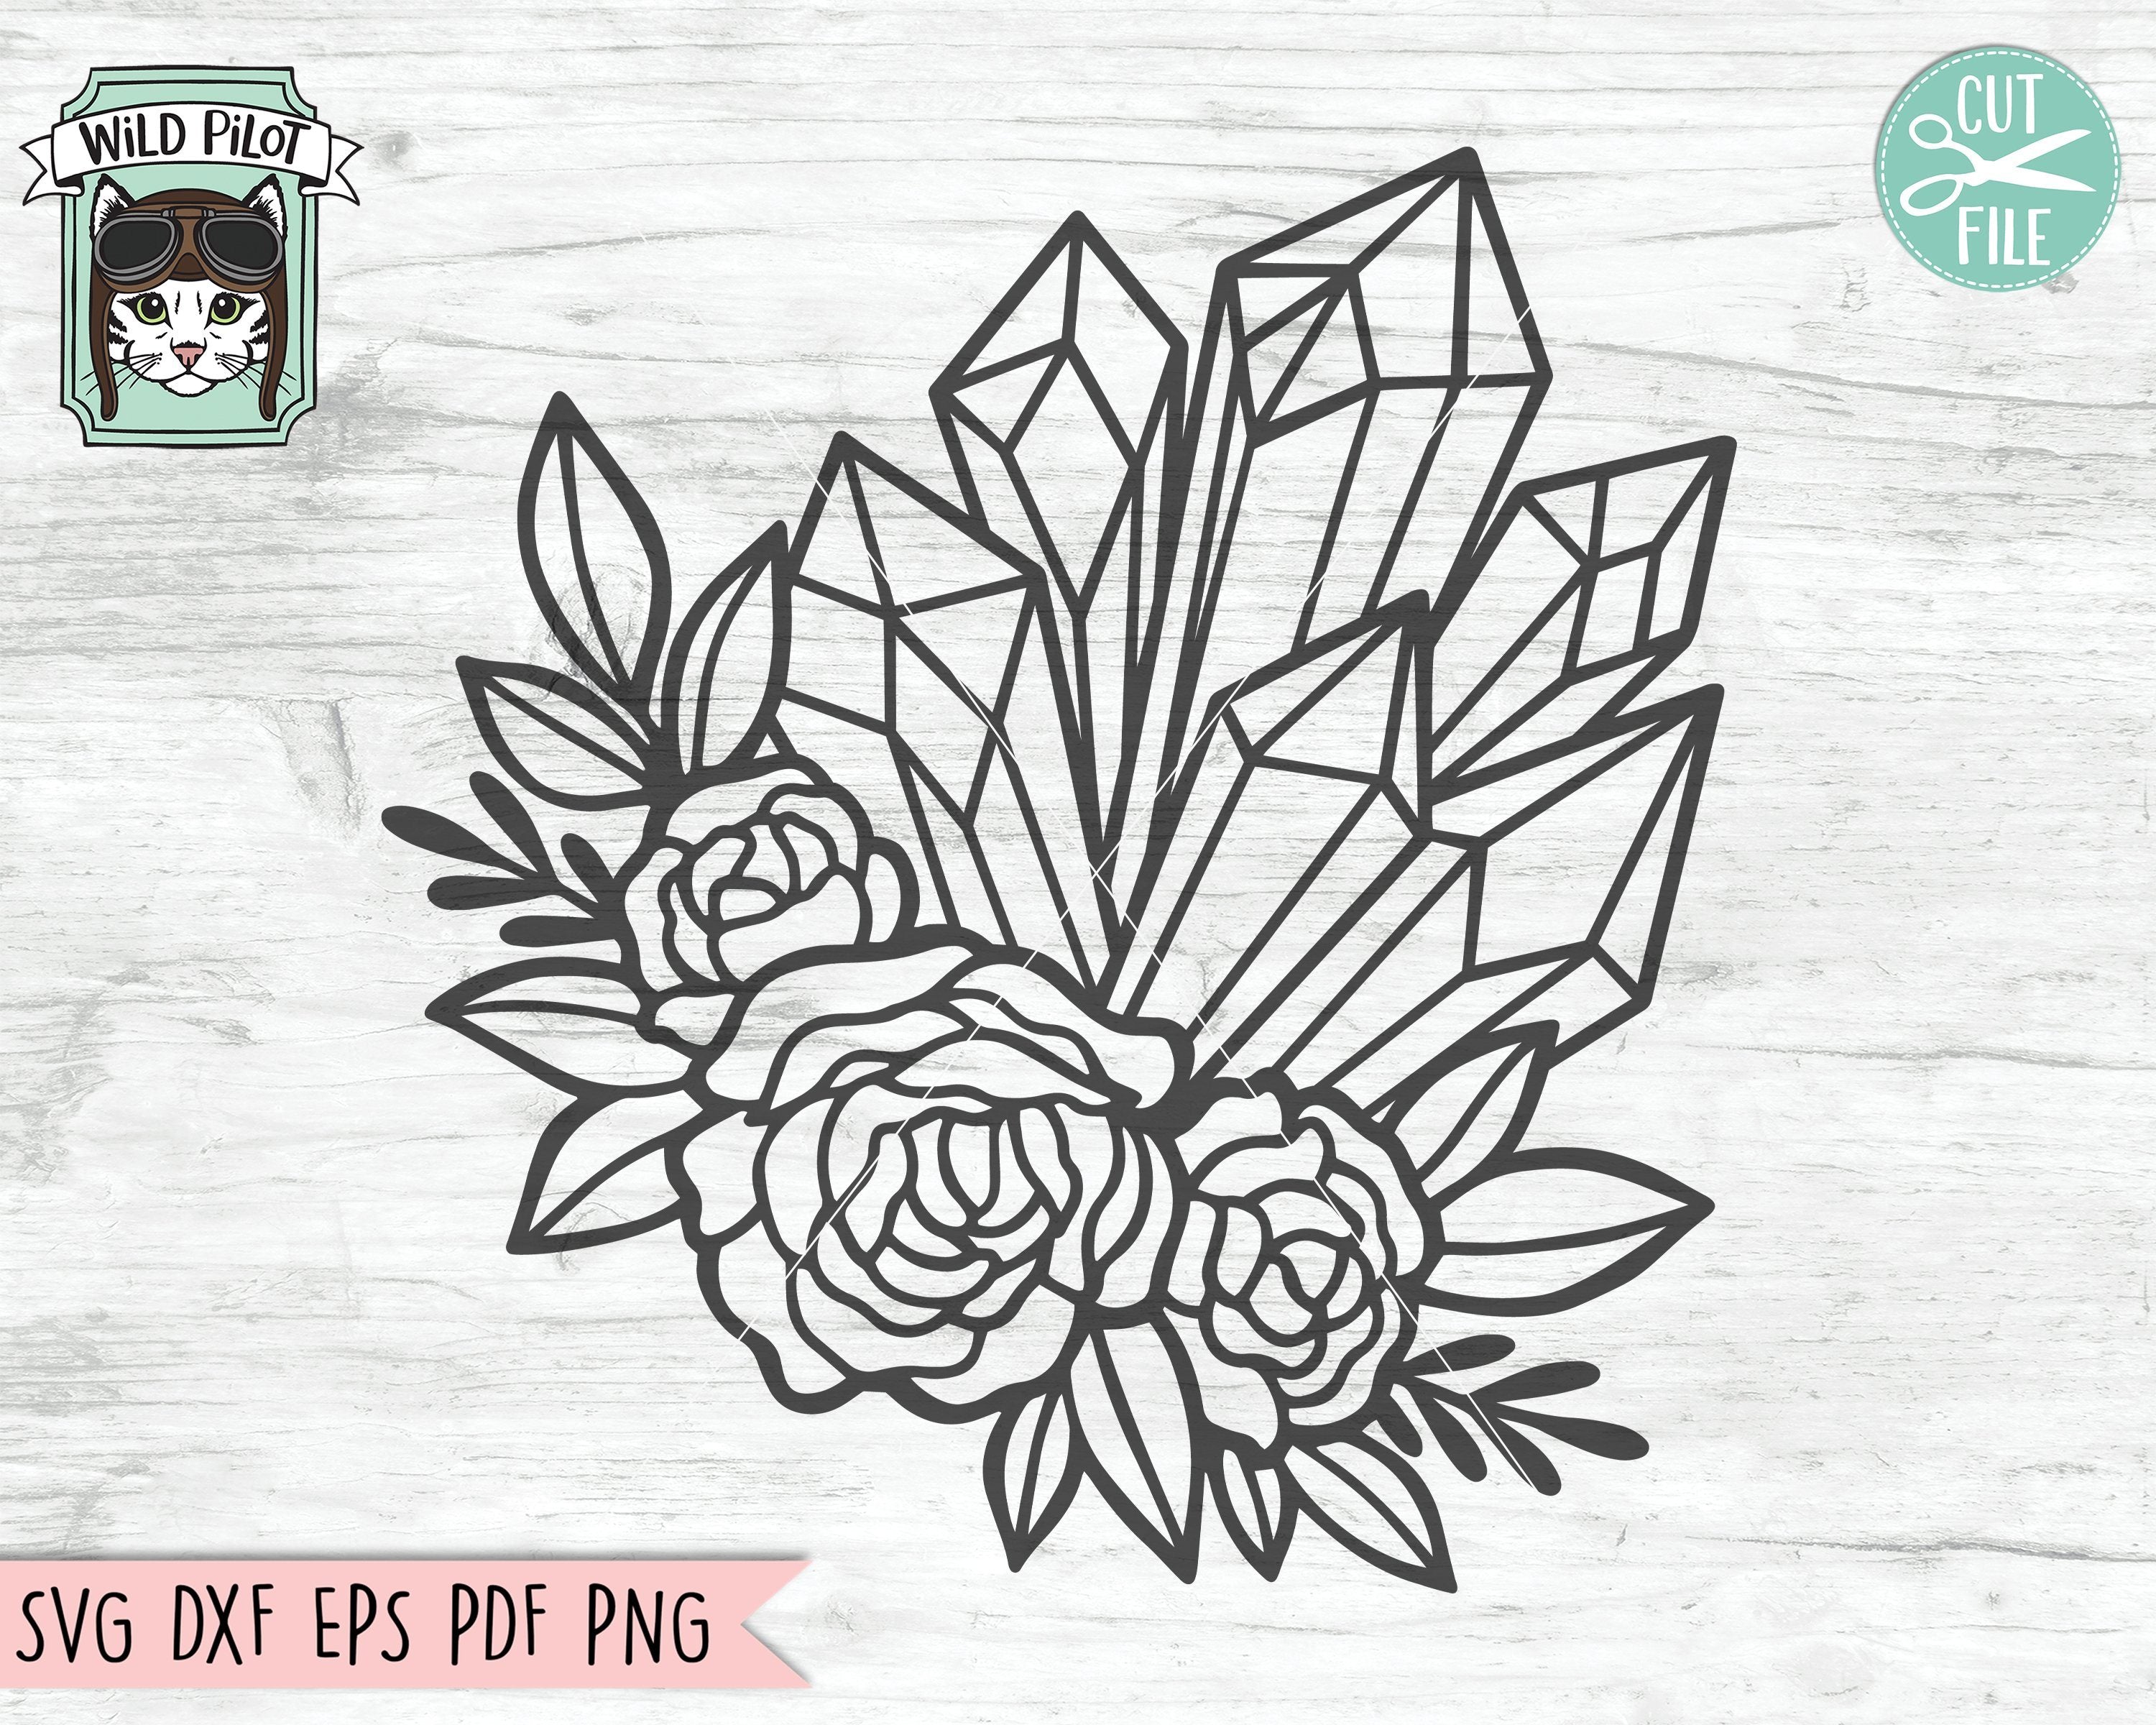 Download Crystals Svg Files Crystal Cut File Crystal Flowers Svg File Crystal Floral Svg Flowers Clipart Floral Vector Png Dxf Eps So Fontsy